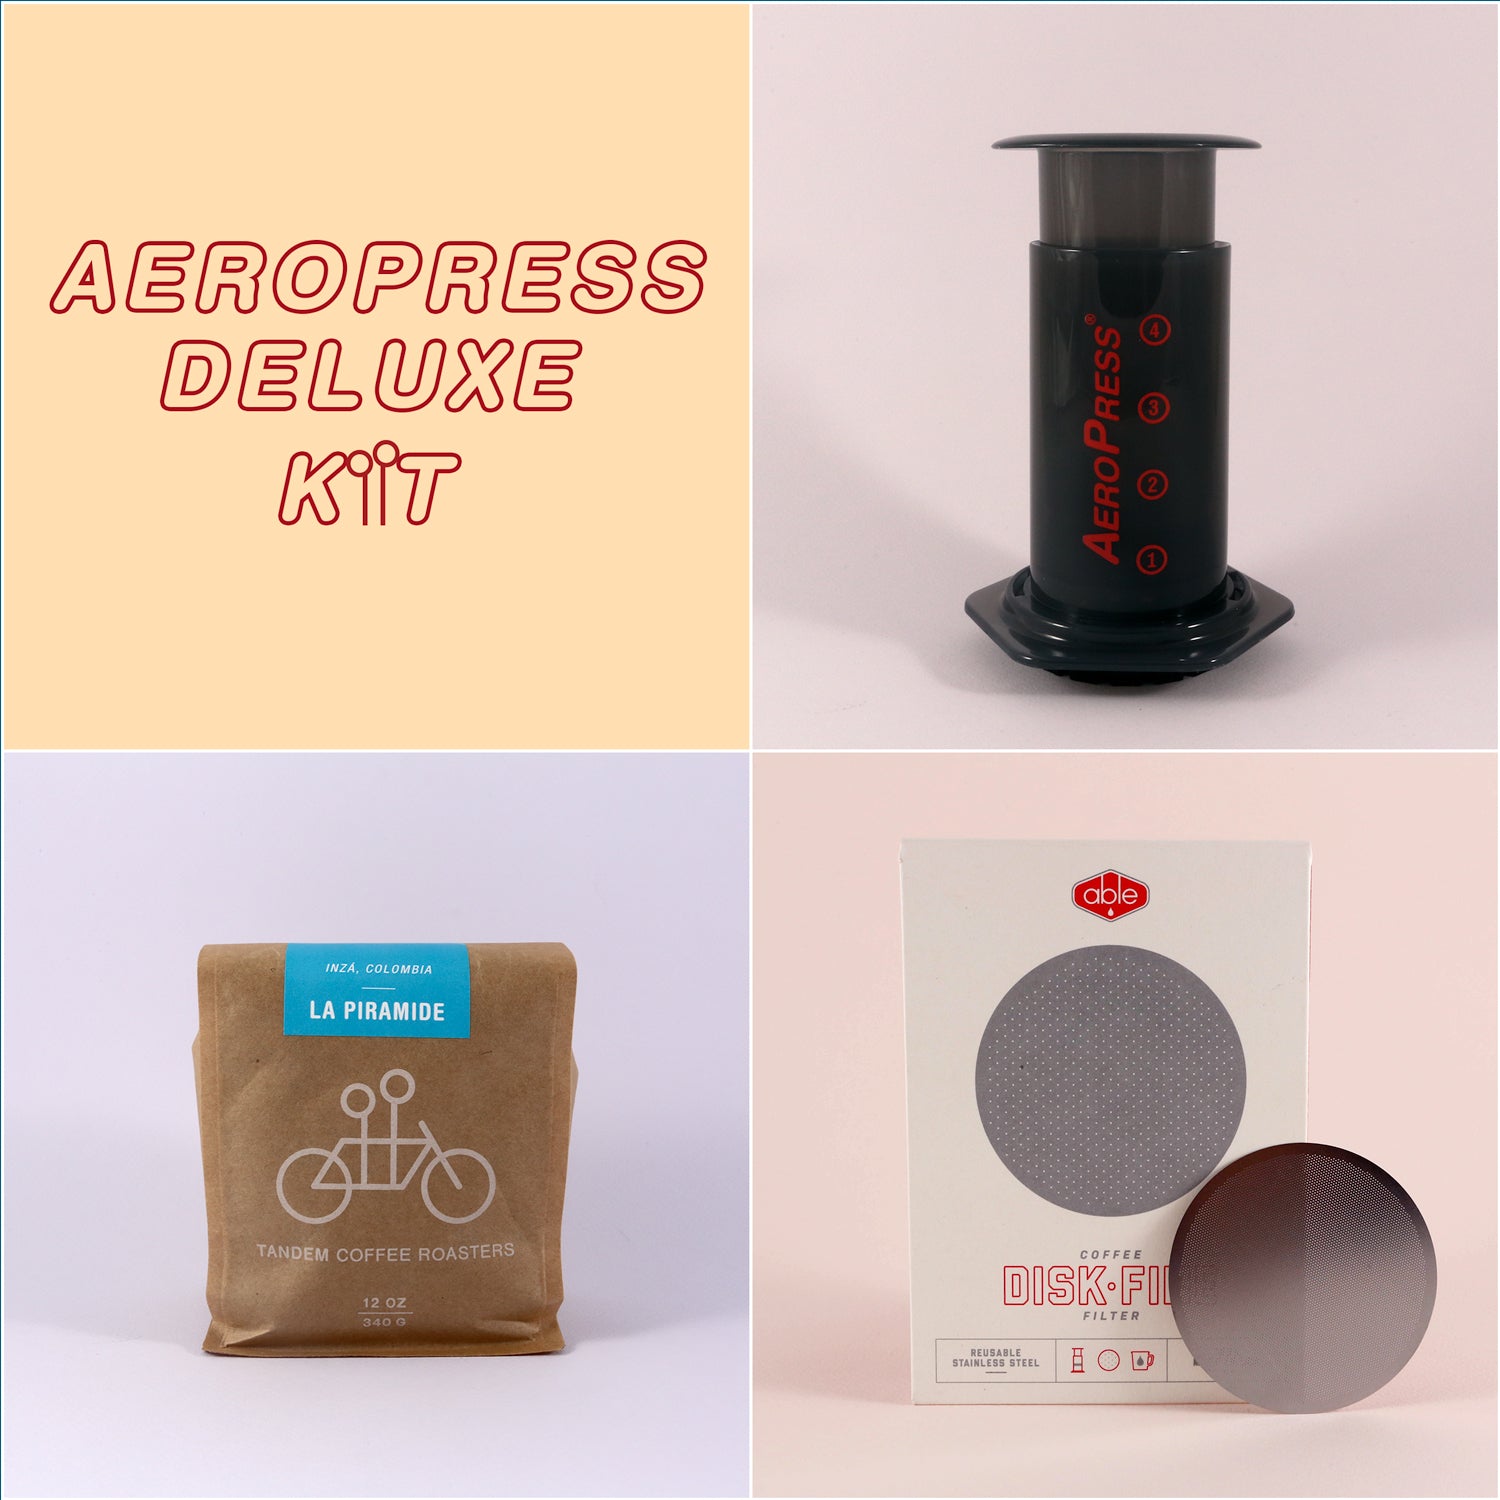 Collage featuring four images: top left shows "AeroPress Deluxe Kit" text, top right displays an AeroPress coffee maker, bottom left features a bag of freshly roasted "La Piramide" from Tandem Coffee Roasters.